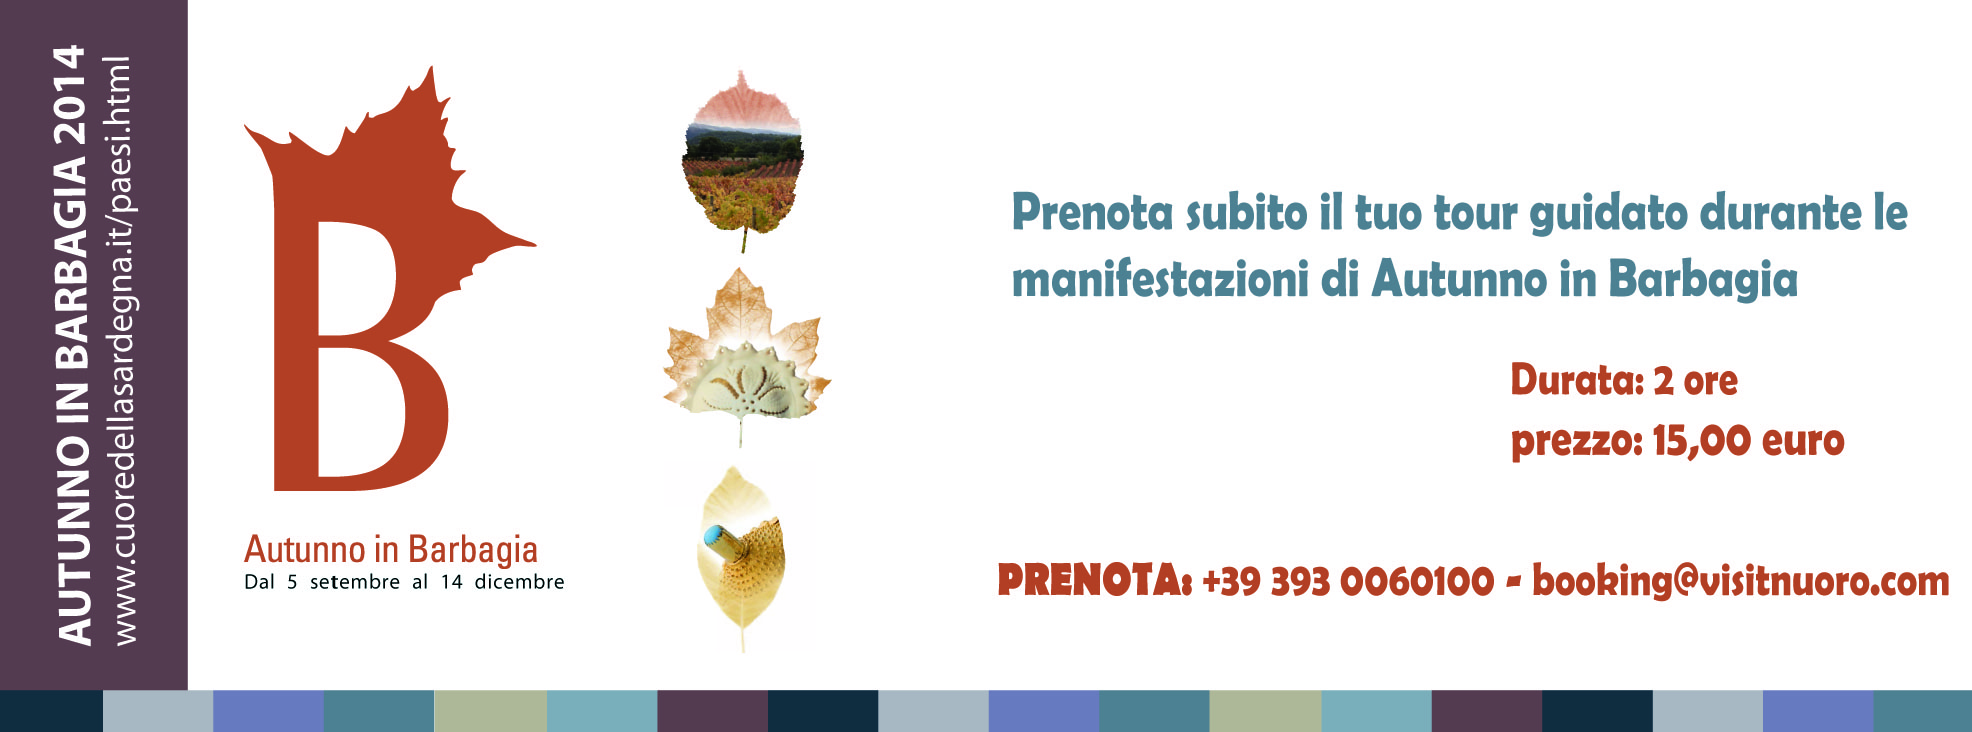 Autunno in Barbagia 2014